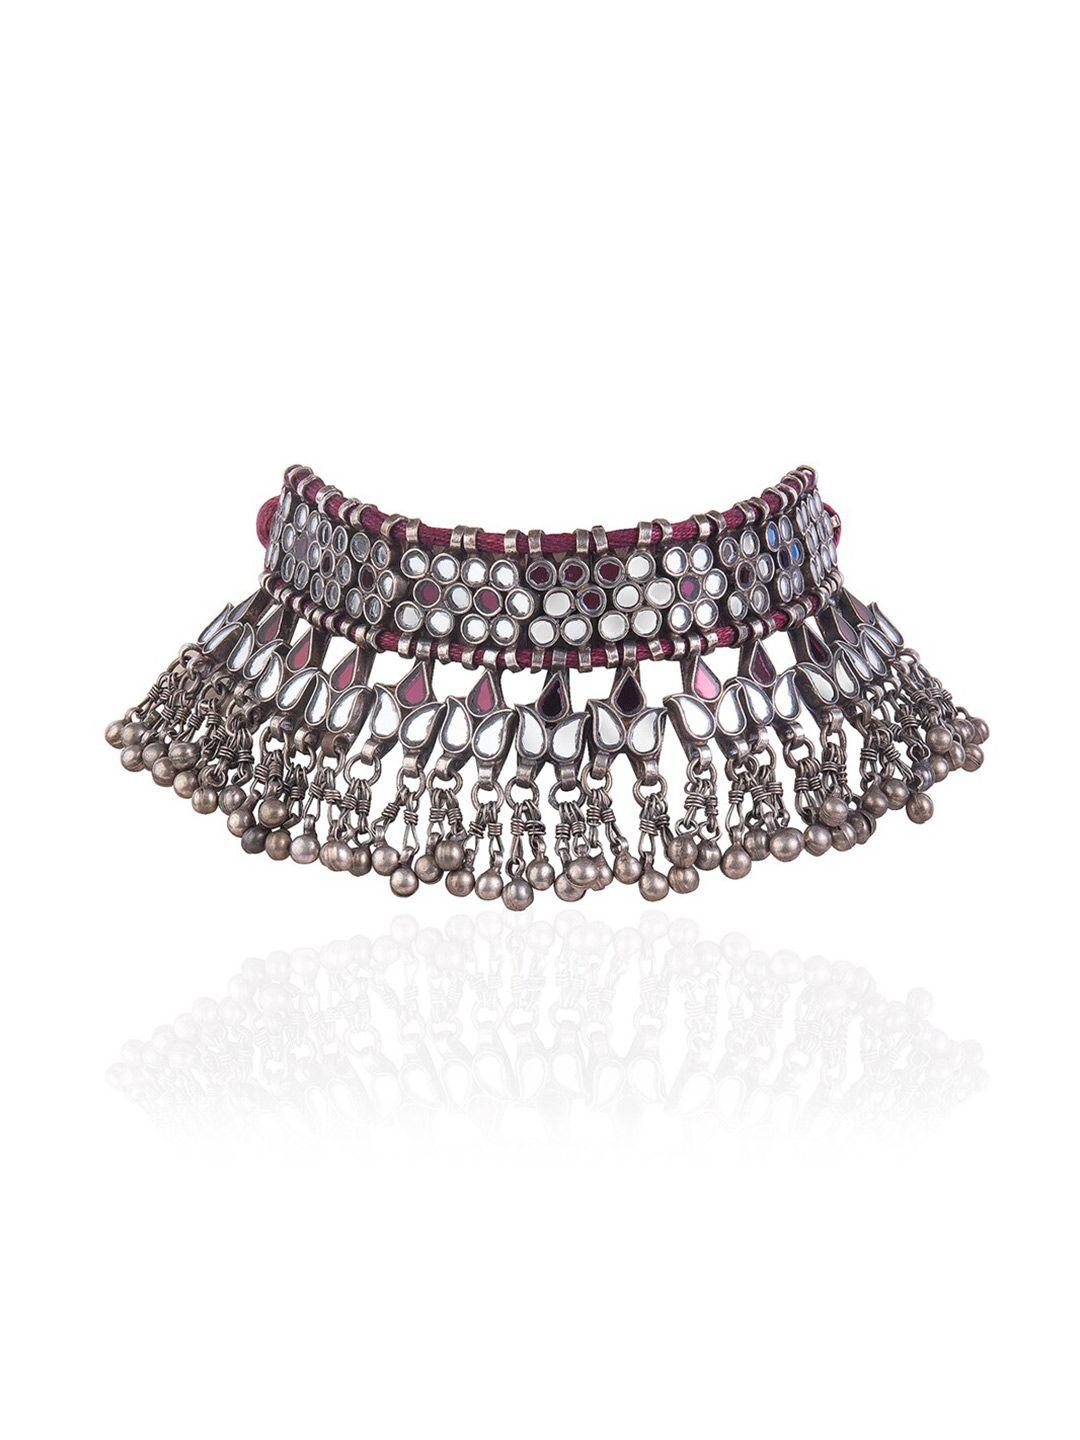 curio cottage red & silver-toned silver-plated oxidised choker necklace